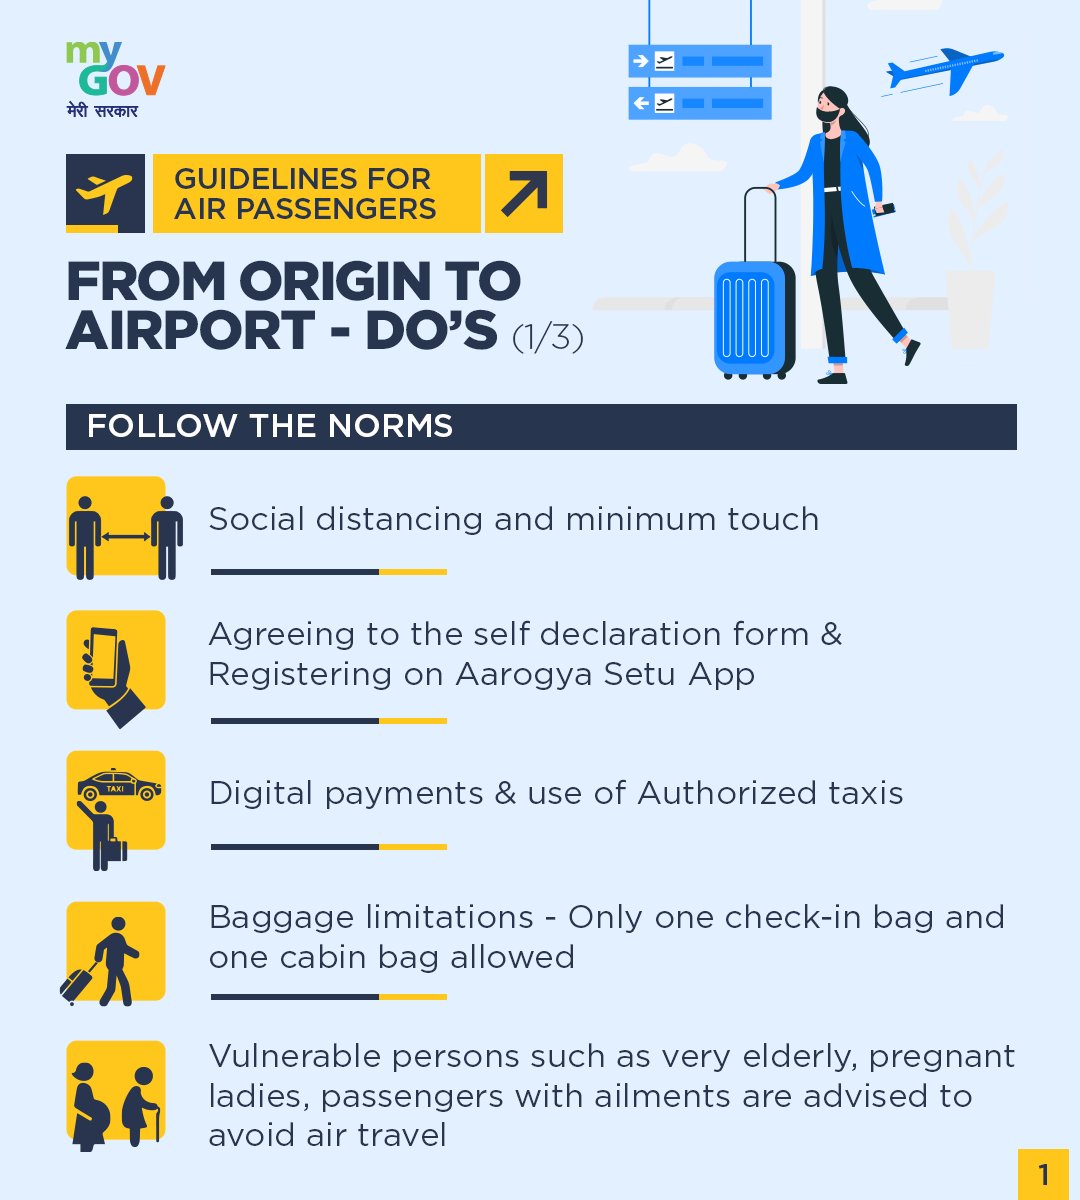 If you are planning to travel by air then here are the guidelines issued by Govt. of India for you. Follow these & stay safe!  #IndiaFightsCorona